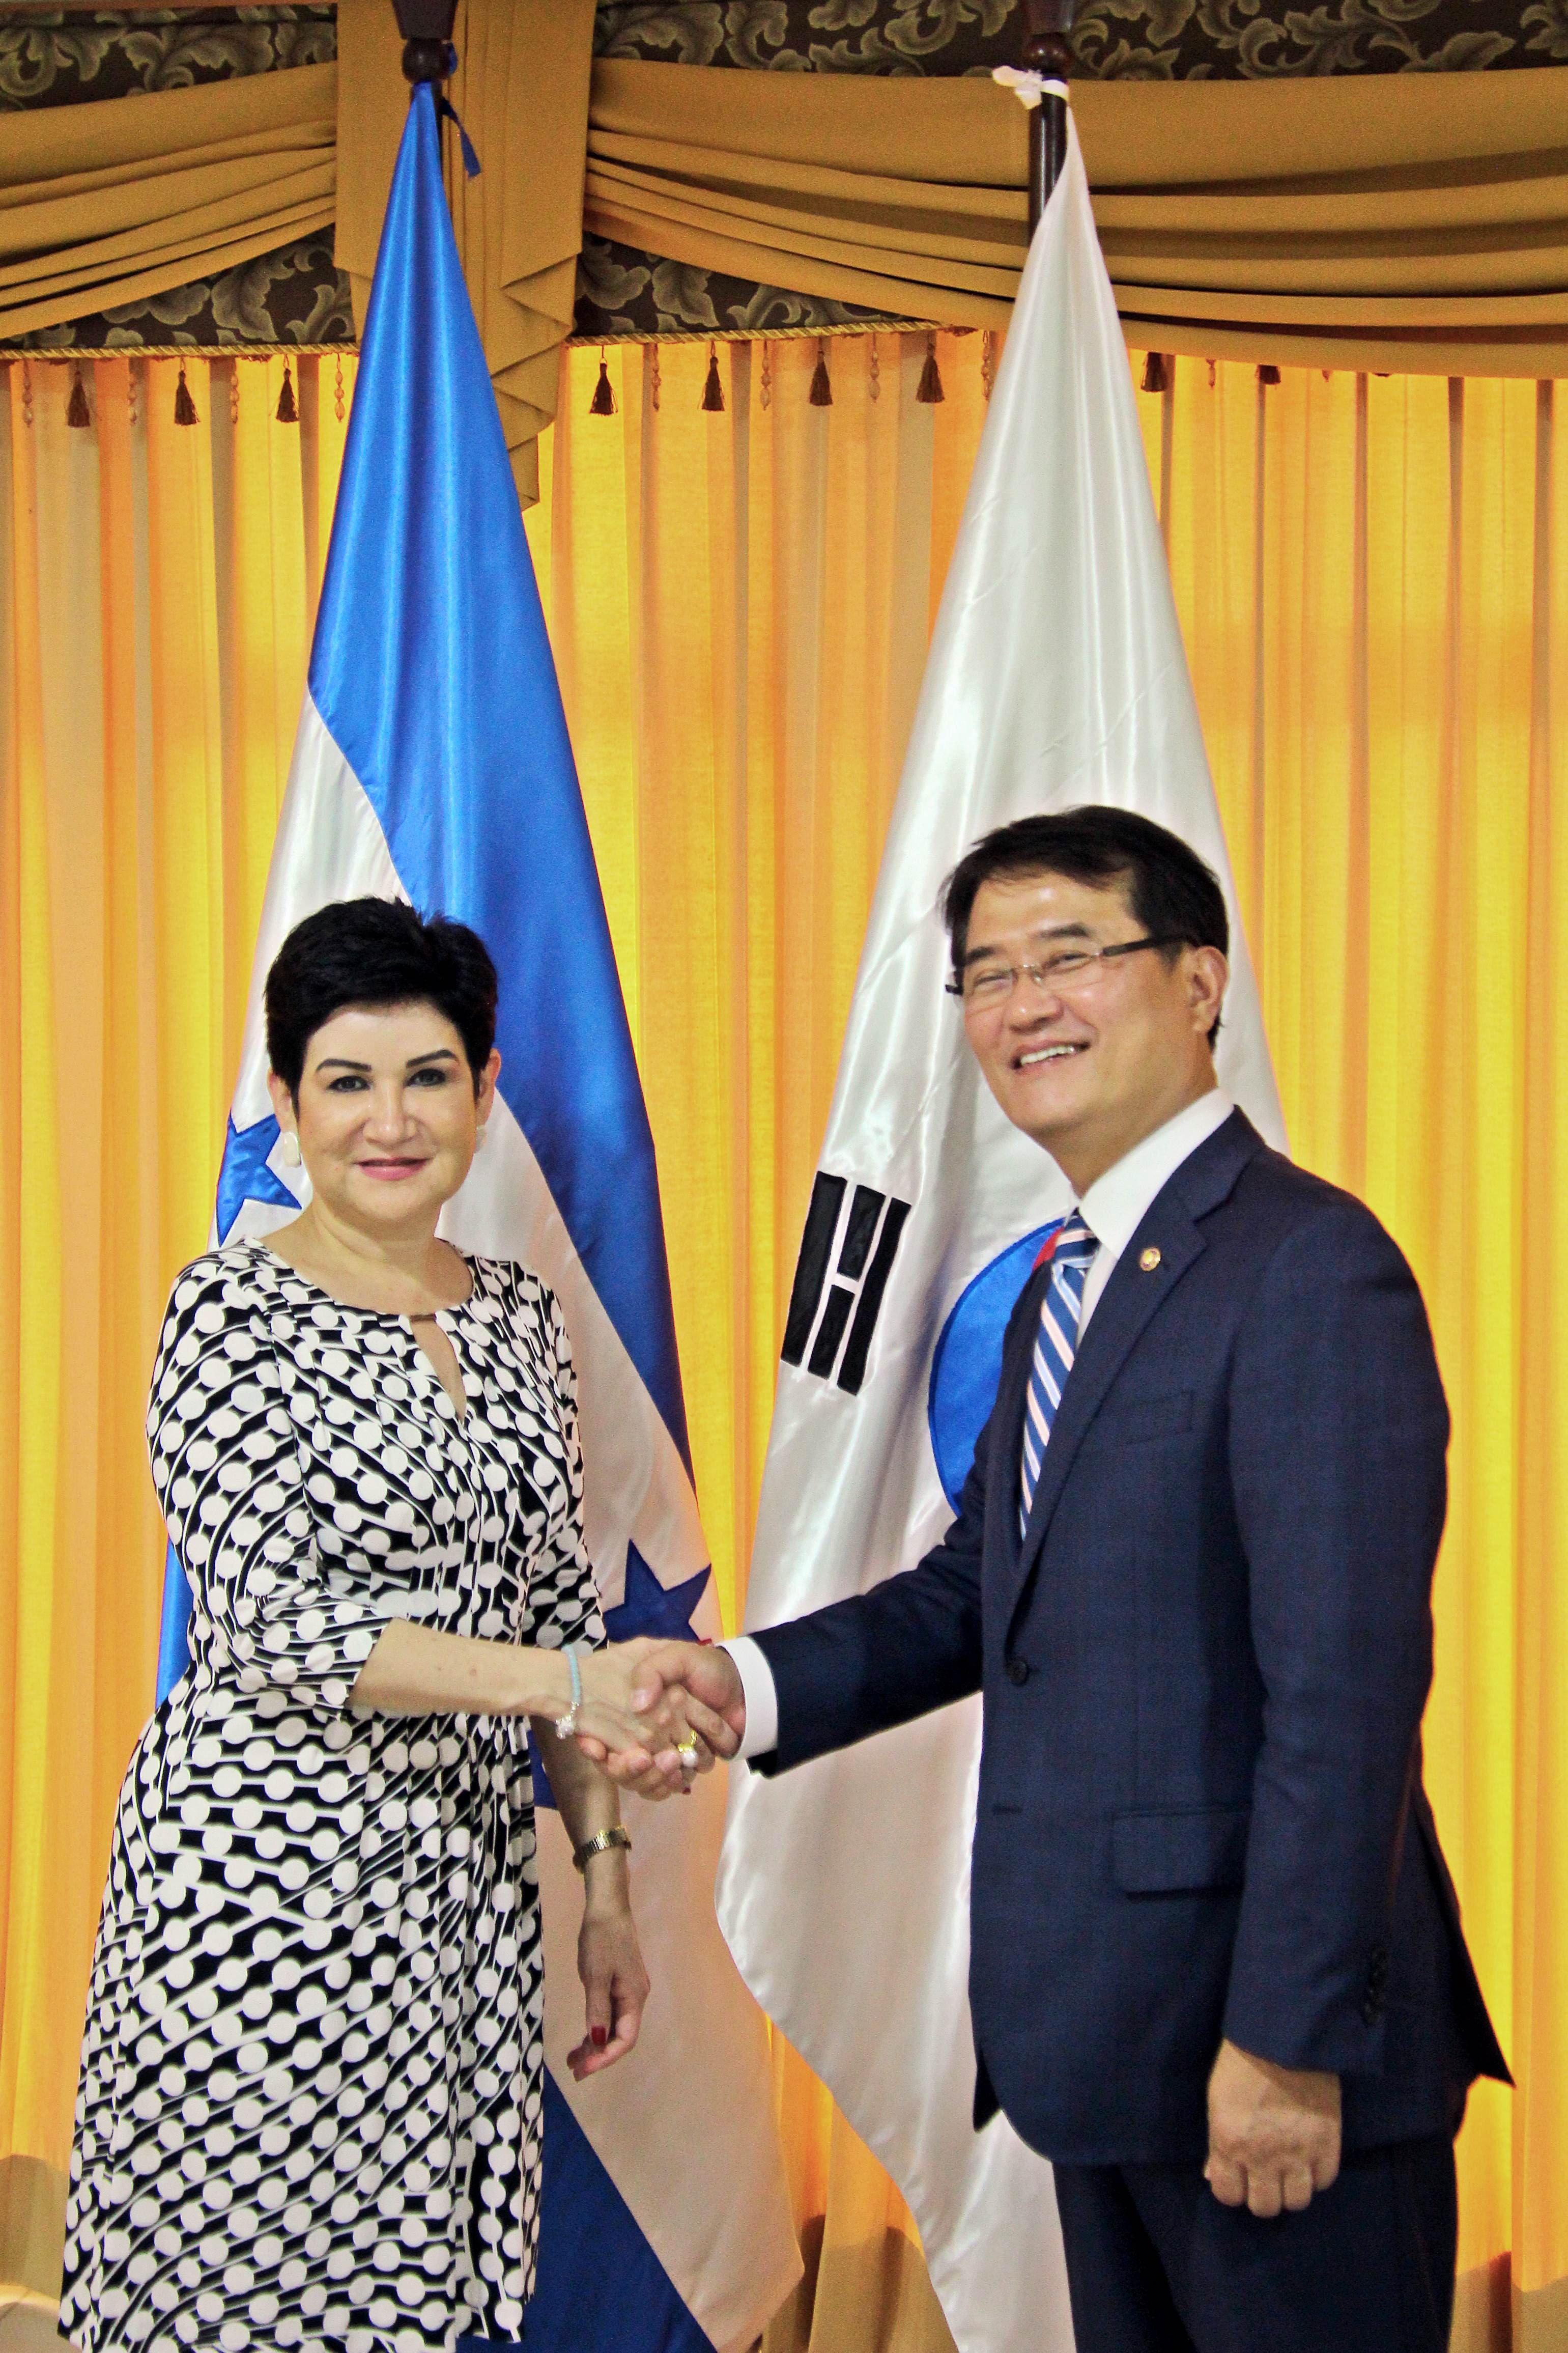 Vice Minister Yoon Jong-in is paying a courtesy call to and taking photos with the Honduran Vice President Maria Antonia Rivera Rosales at the Honduran President’s Office on May 21. Korea and Honduras discussed ways to enhance comprehensive cooperation in the areas of public administration including simplification of administration, resident registration and Data Center. 